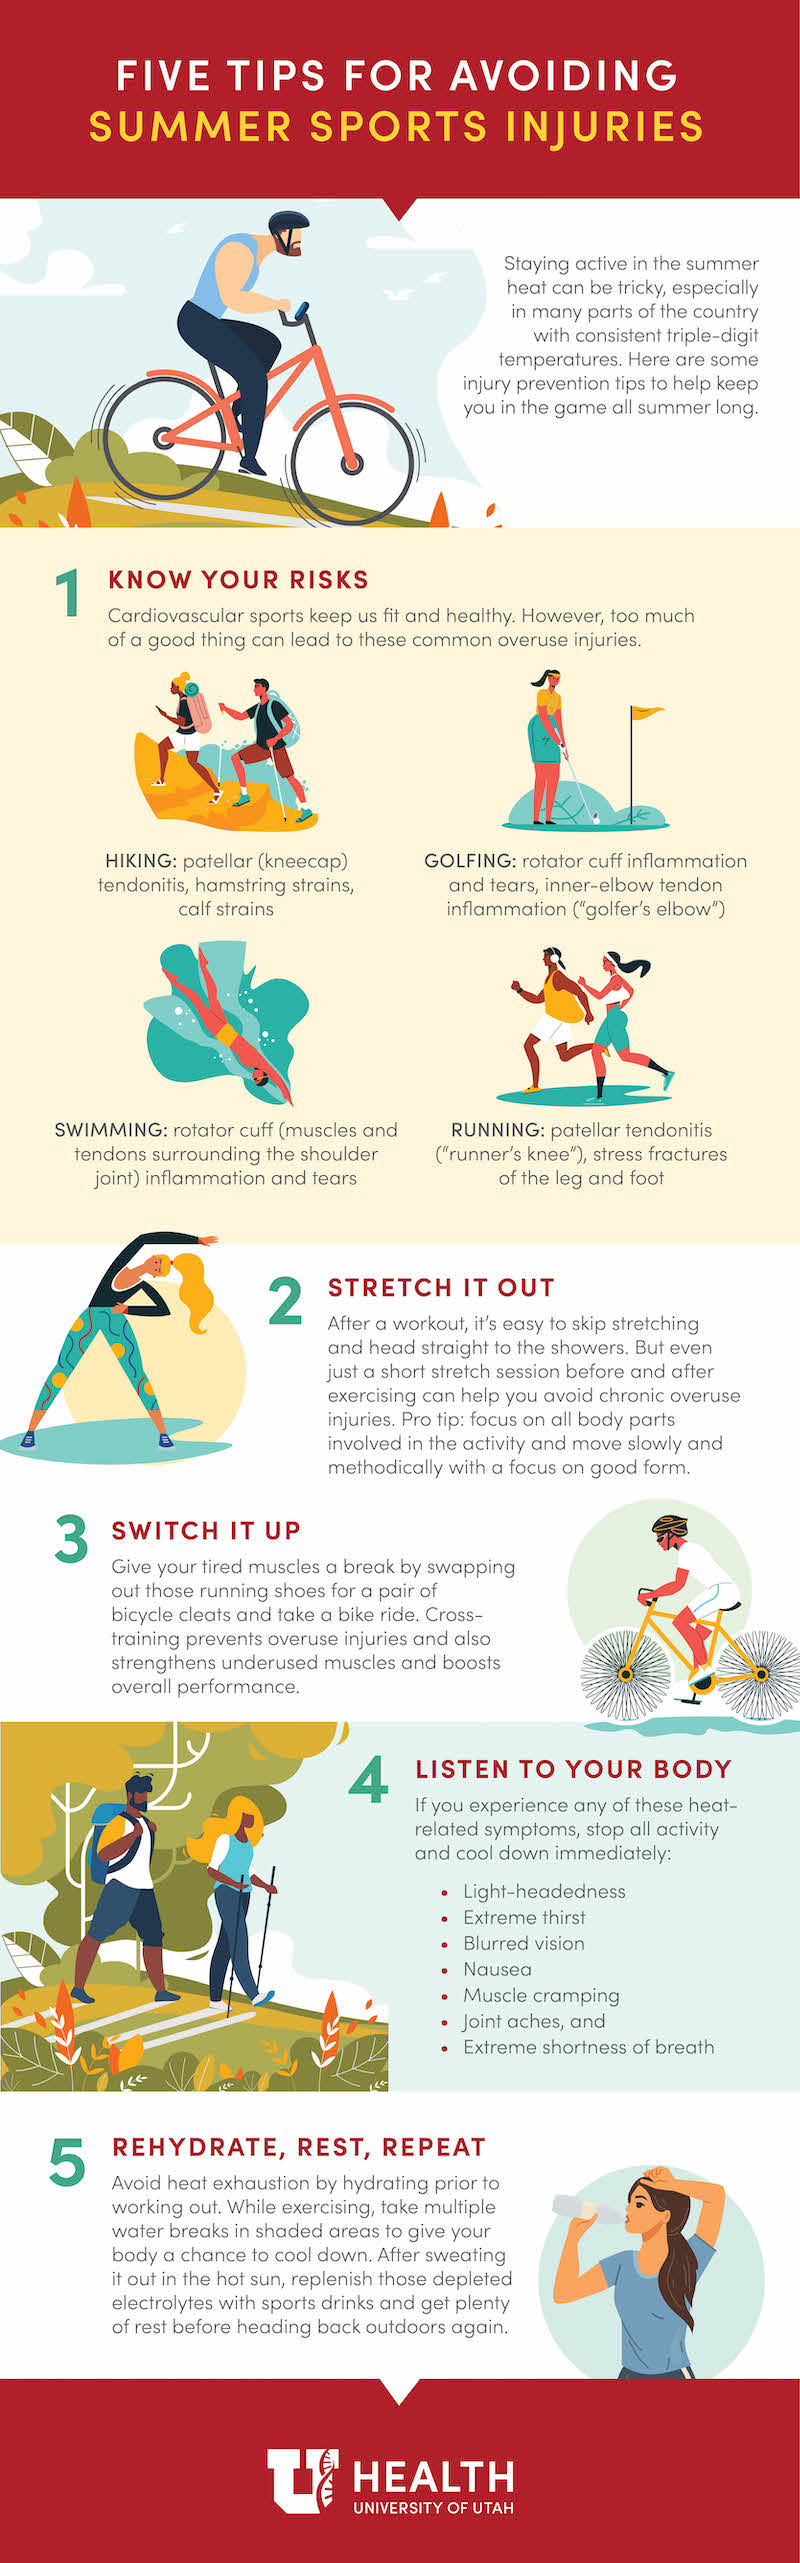 Infographic explains the five most common summer sports injuries and how to prevent them.